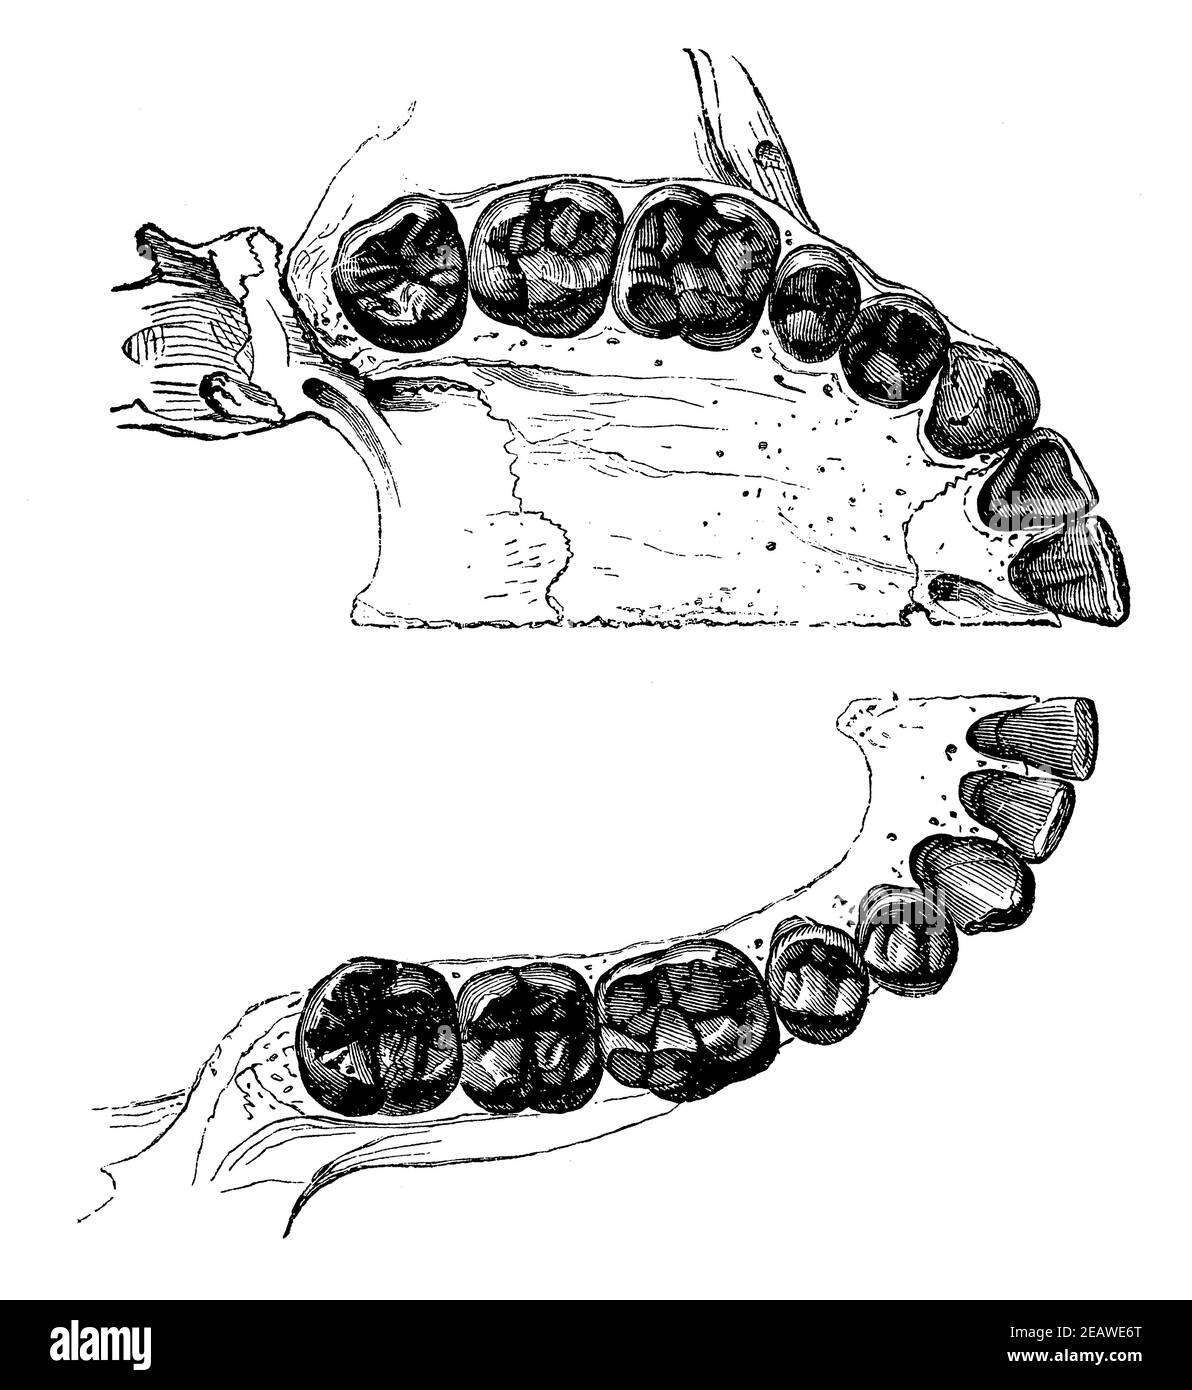 Teeth of the human upper jaw and lower jaw with a view of the crowns. Illustration of the 19th century. Germany. White background. Stock Photo